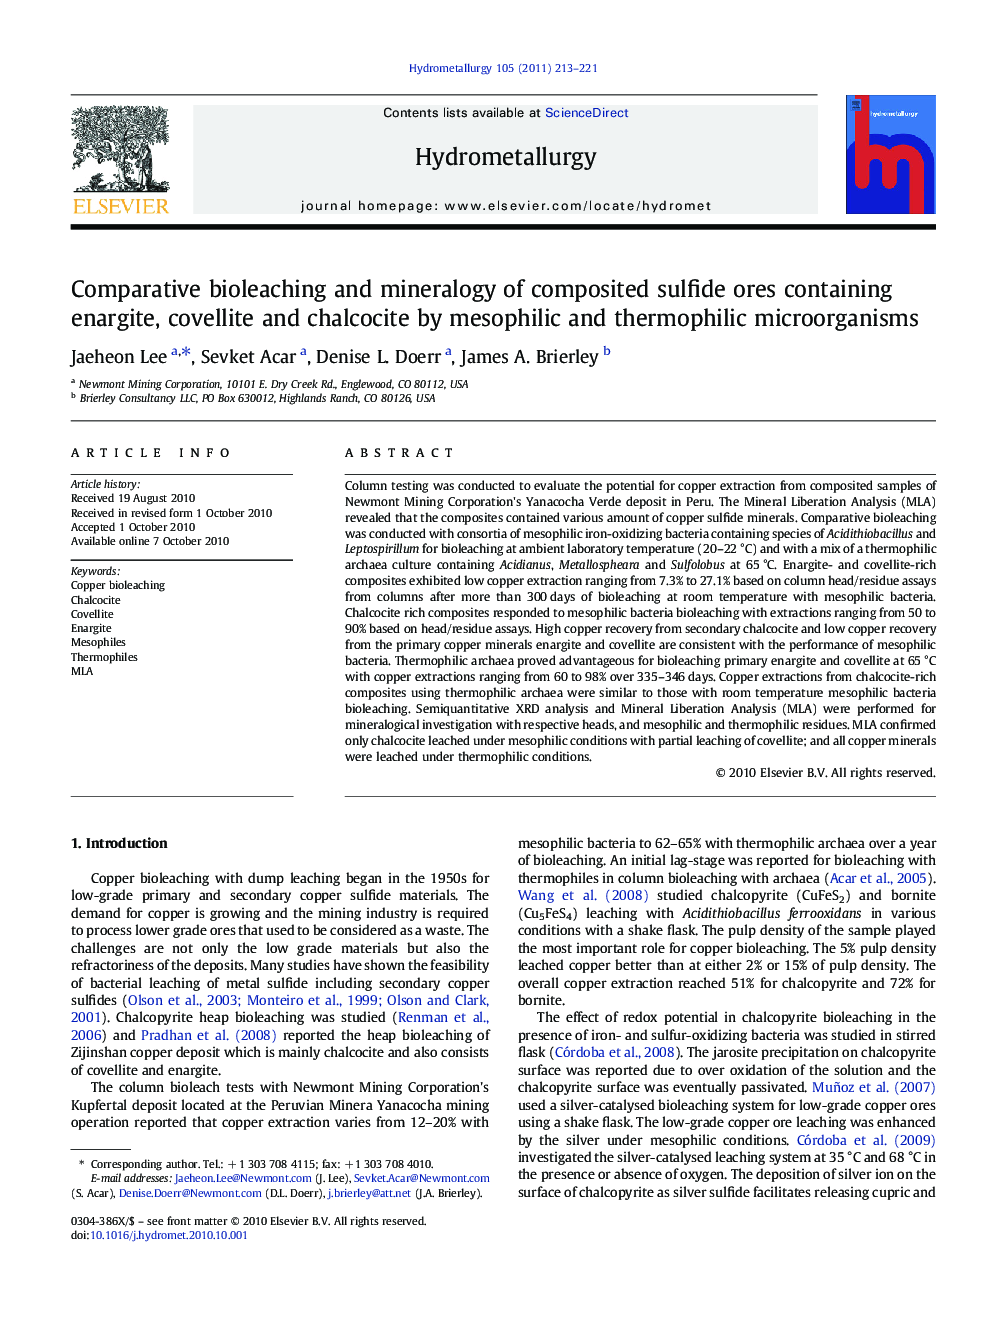 Comparative bioleaching and mineralogy of composited sulfide ores containing enargite, covellite and chalcocite by mesophilic and thermophilic microorganisms